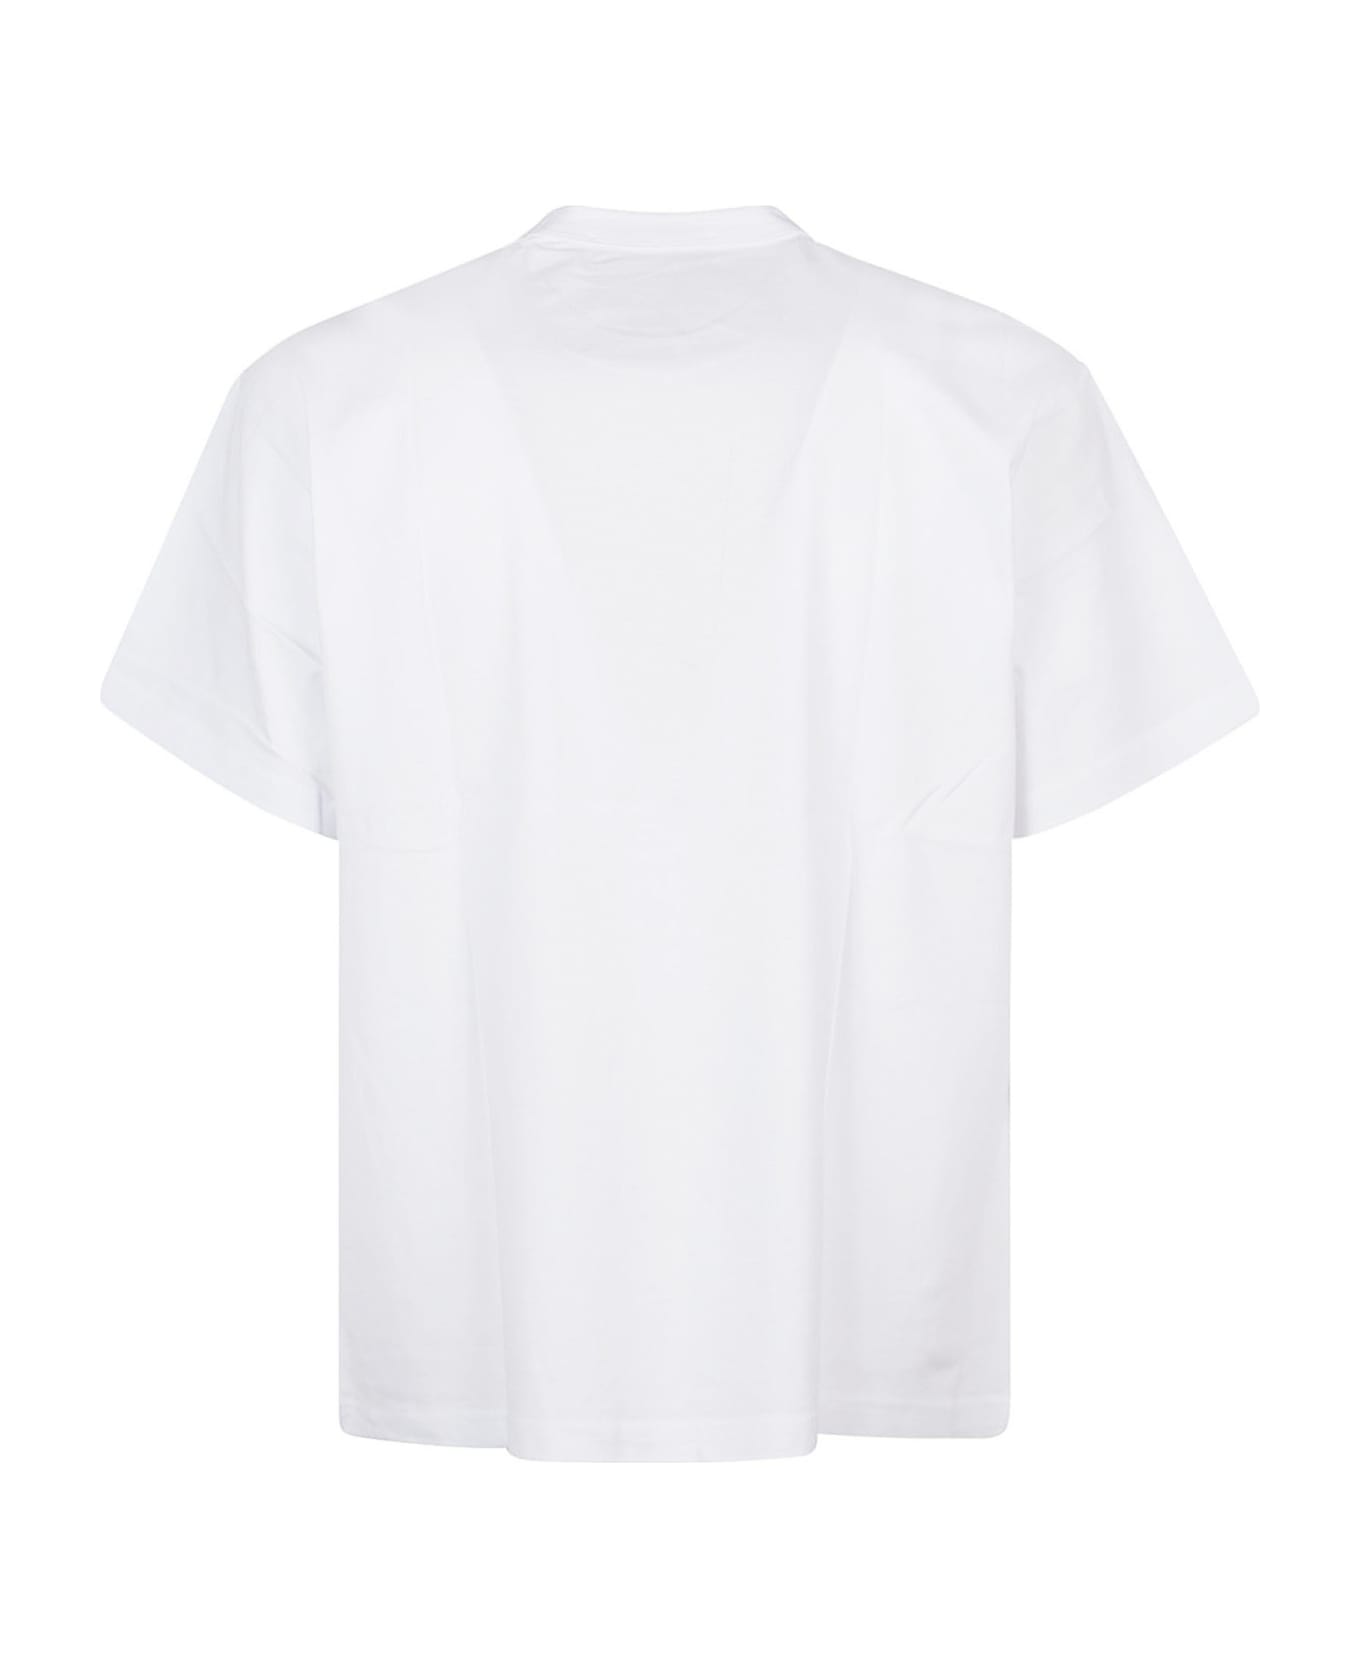 Versace Jeans Couture Small Heart Couture T-shirt - White シャツ